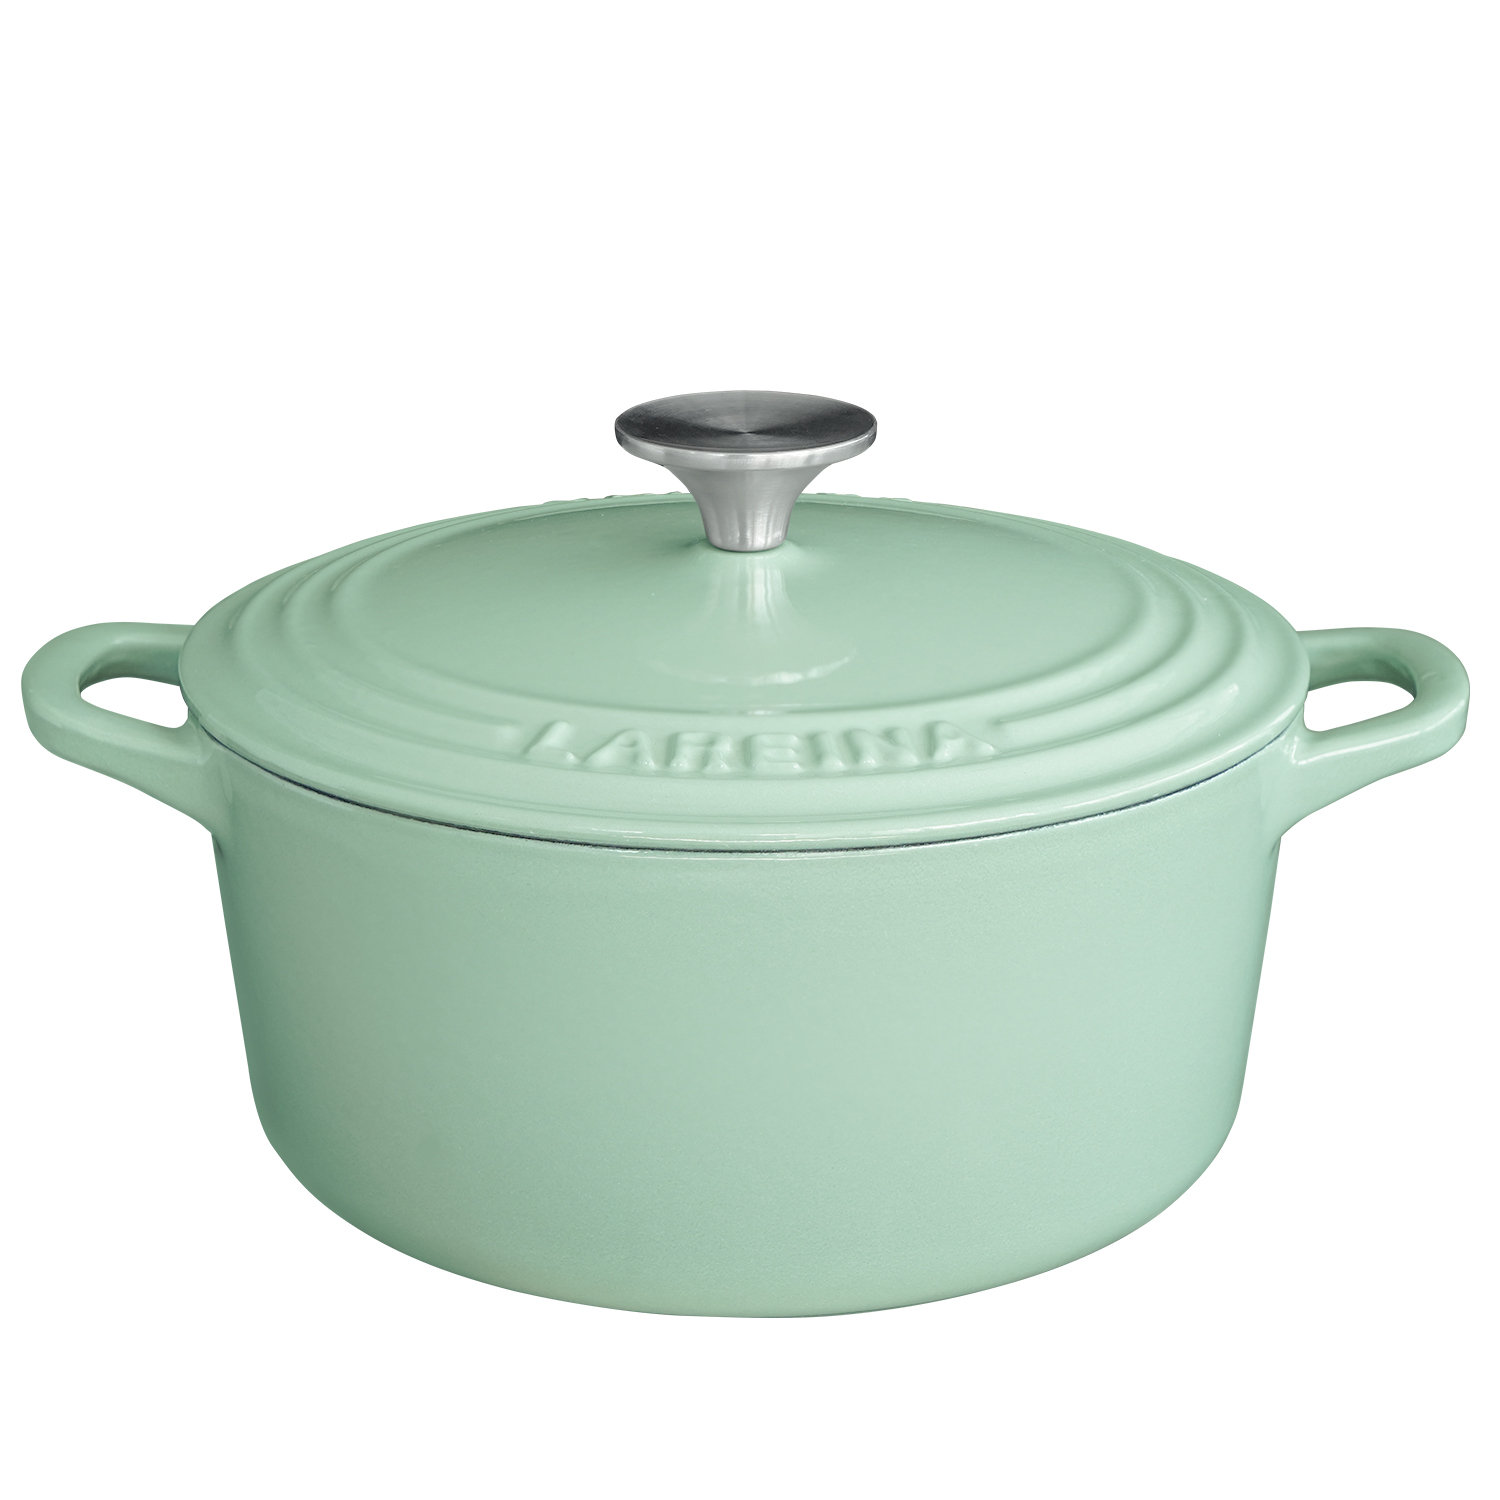 Enameled Cast Iron Signature Oval Dutch Oven, 7 qt Enameled Oval Dutch Oven  Pot with Lid and Dual Handles for Braising, for Braising, Broiling, Bread